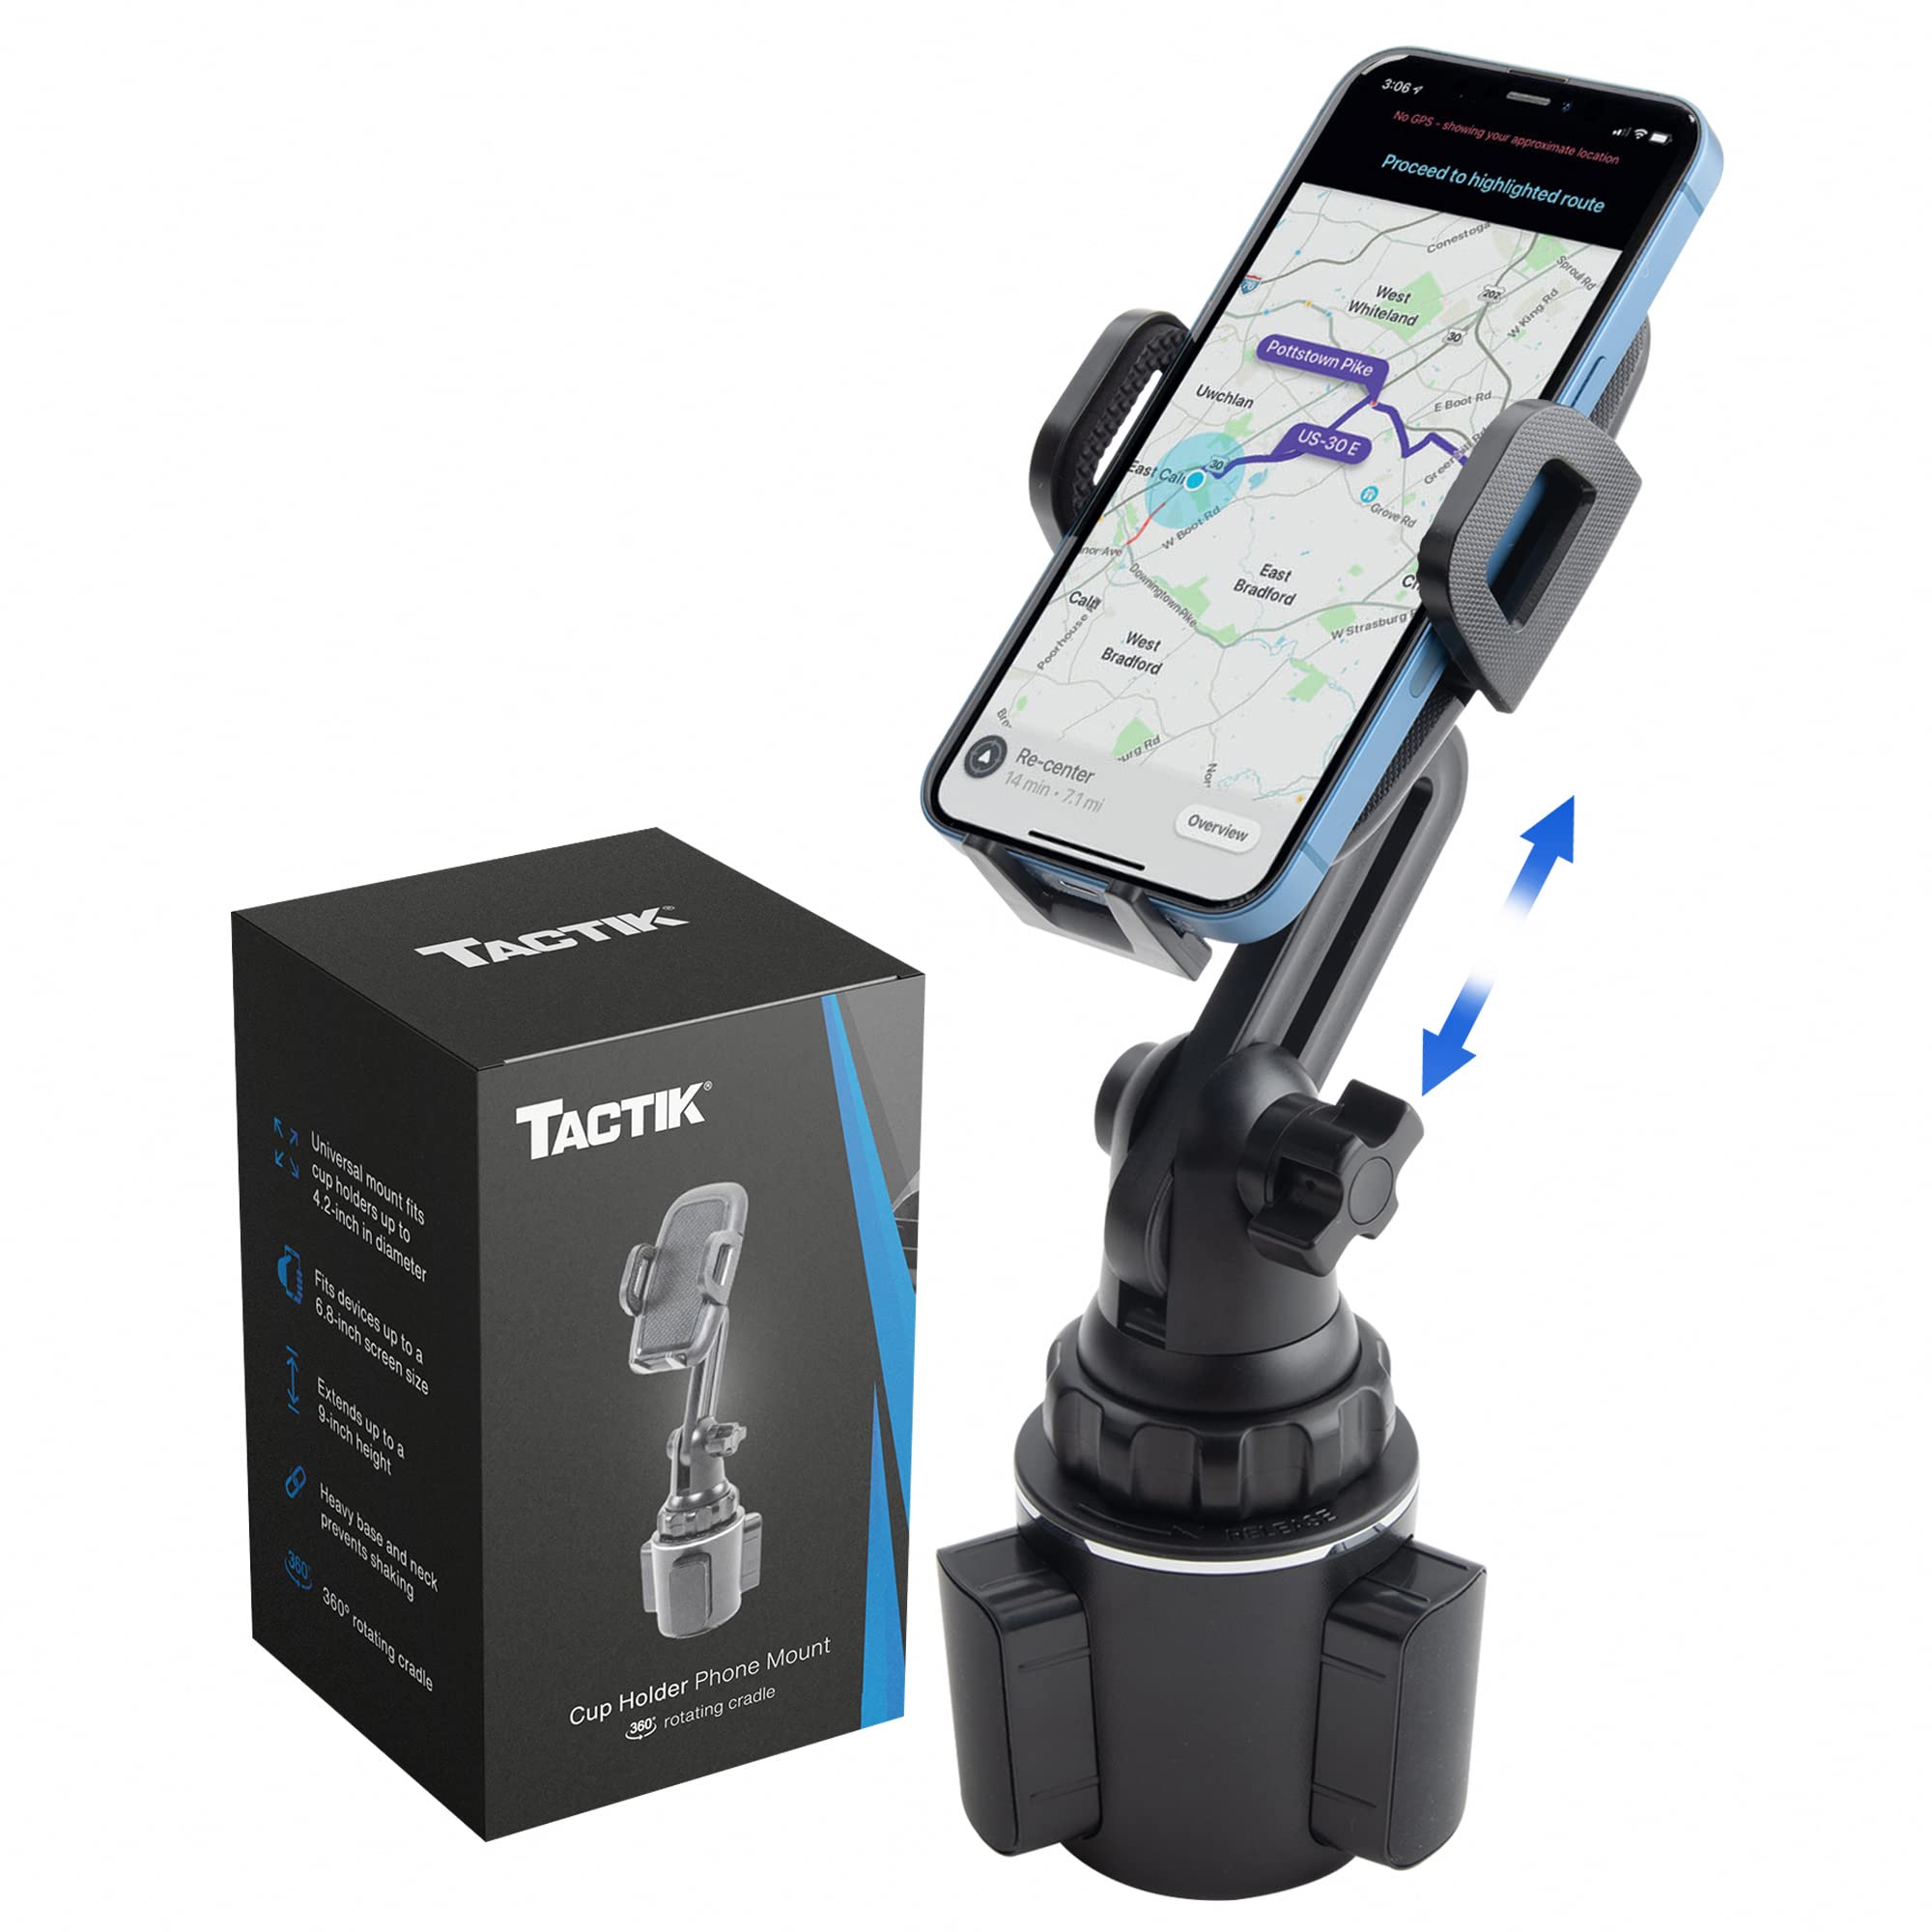 TACTIK Cup Holder Phone Mount Car Phone Holder Mount - Cell Phone Holder Car Adjustable 360° Rotation - Universal iPhone Holder for Car - Compatible with iPhone, Samsung Android, Google, Moto & More